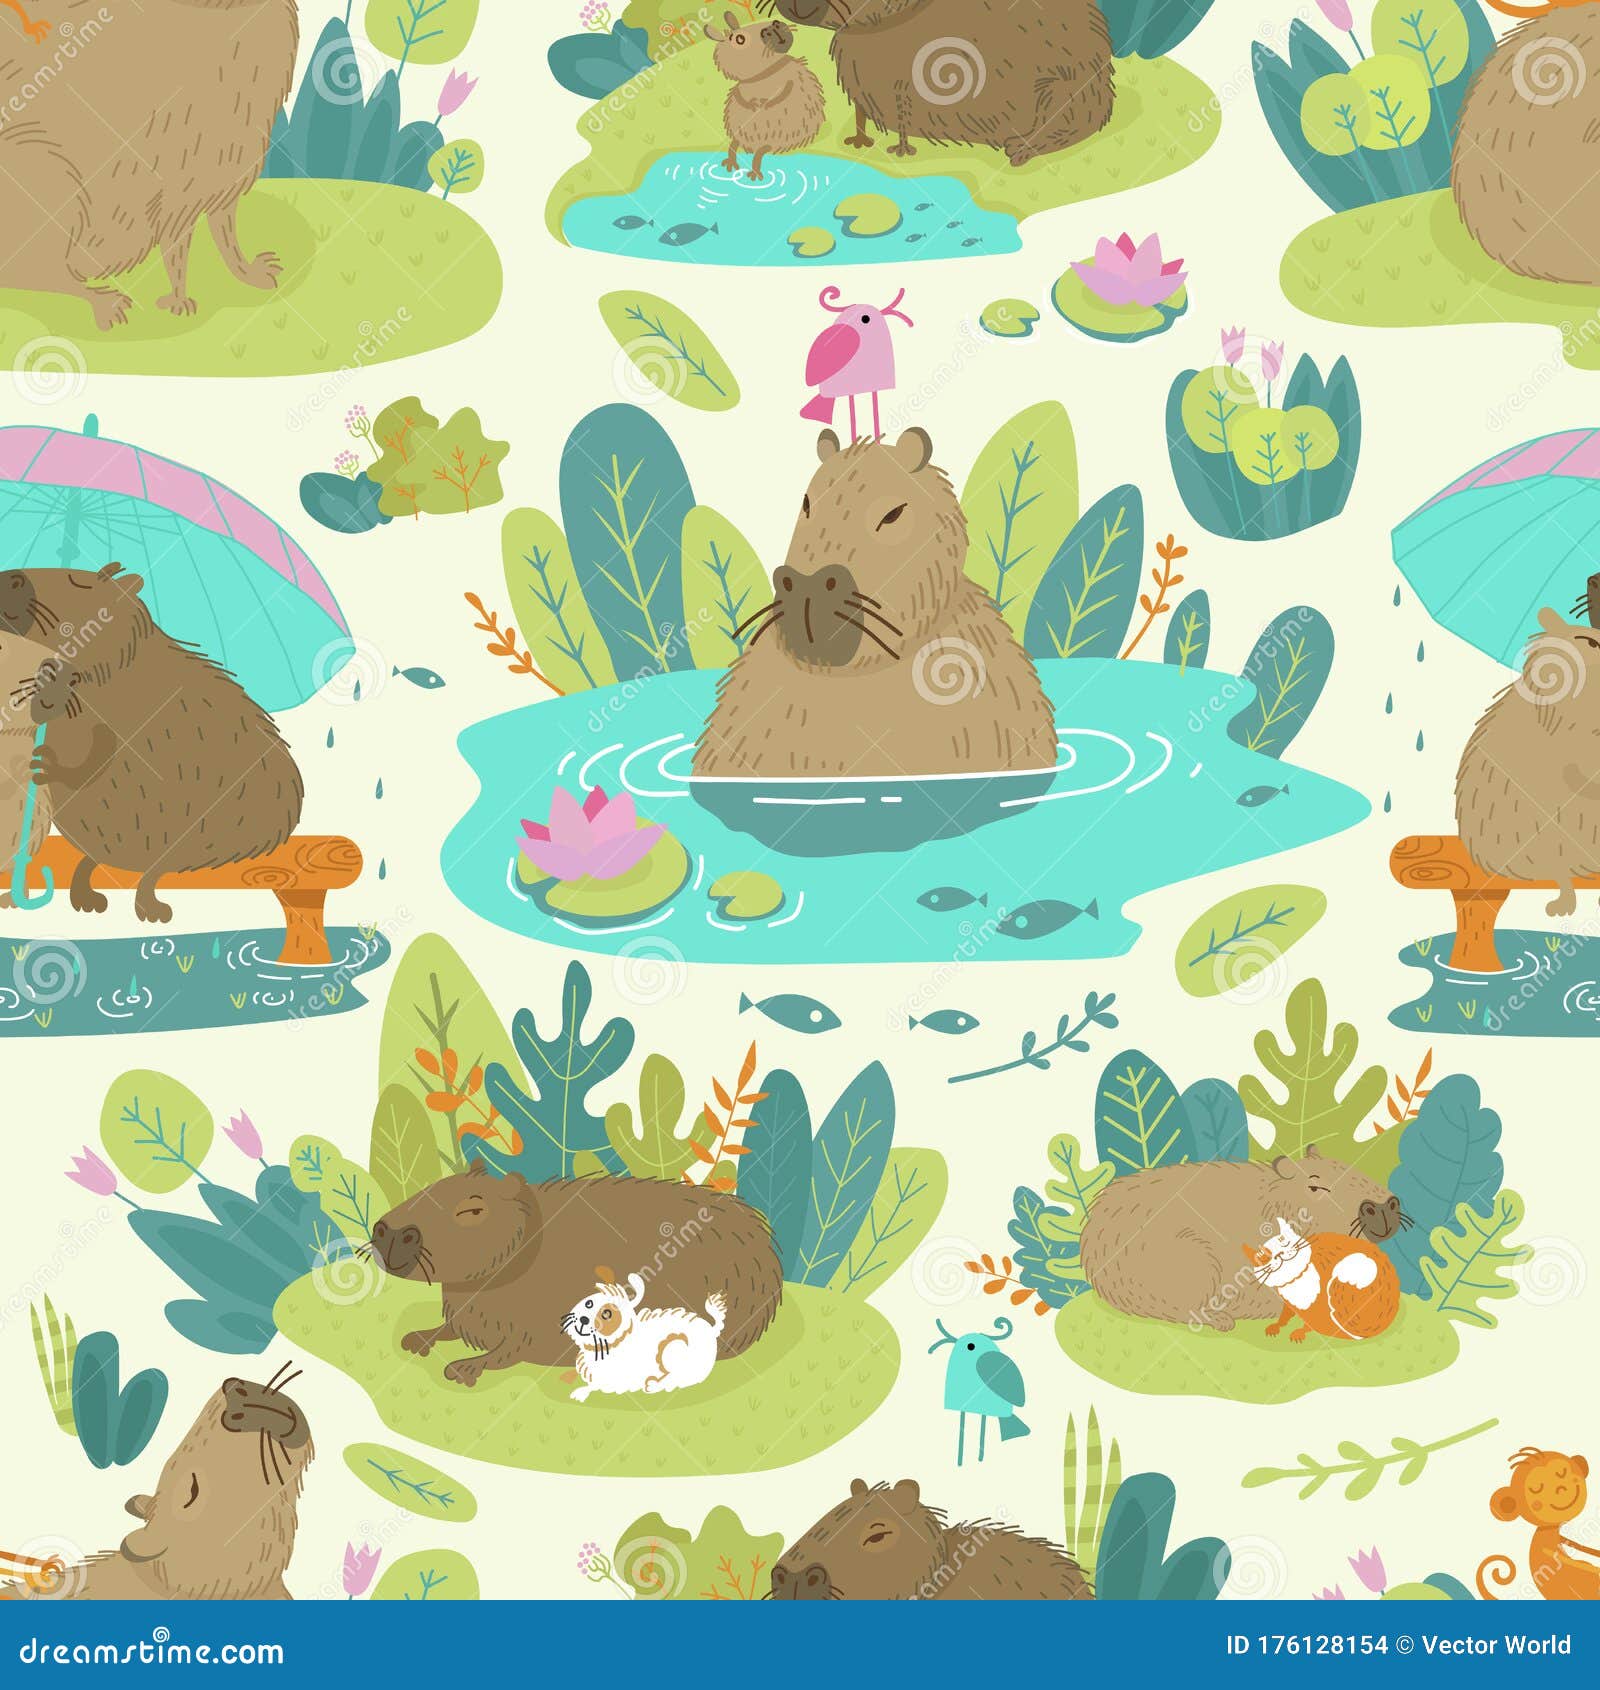 Pattern Image of the Capybara on the Jungle Green Forest and Lake Vector  Illustration Funny Cartoon Animal Stock Vector  Illustration of heavy  cute 176128154